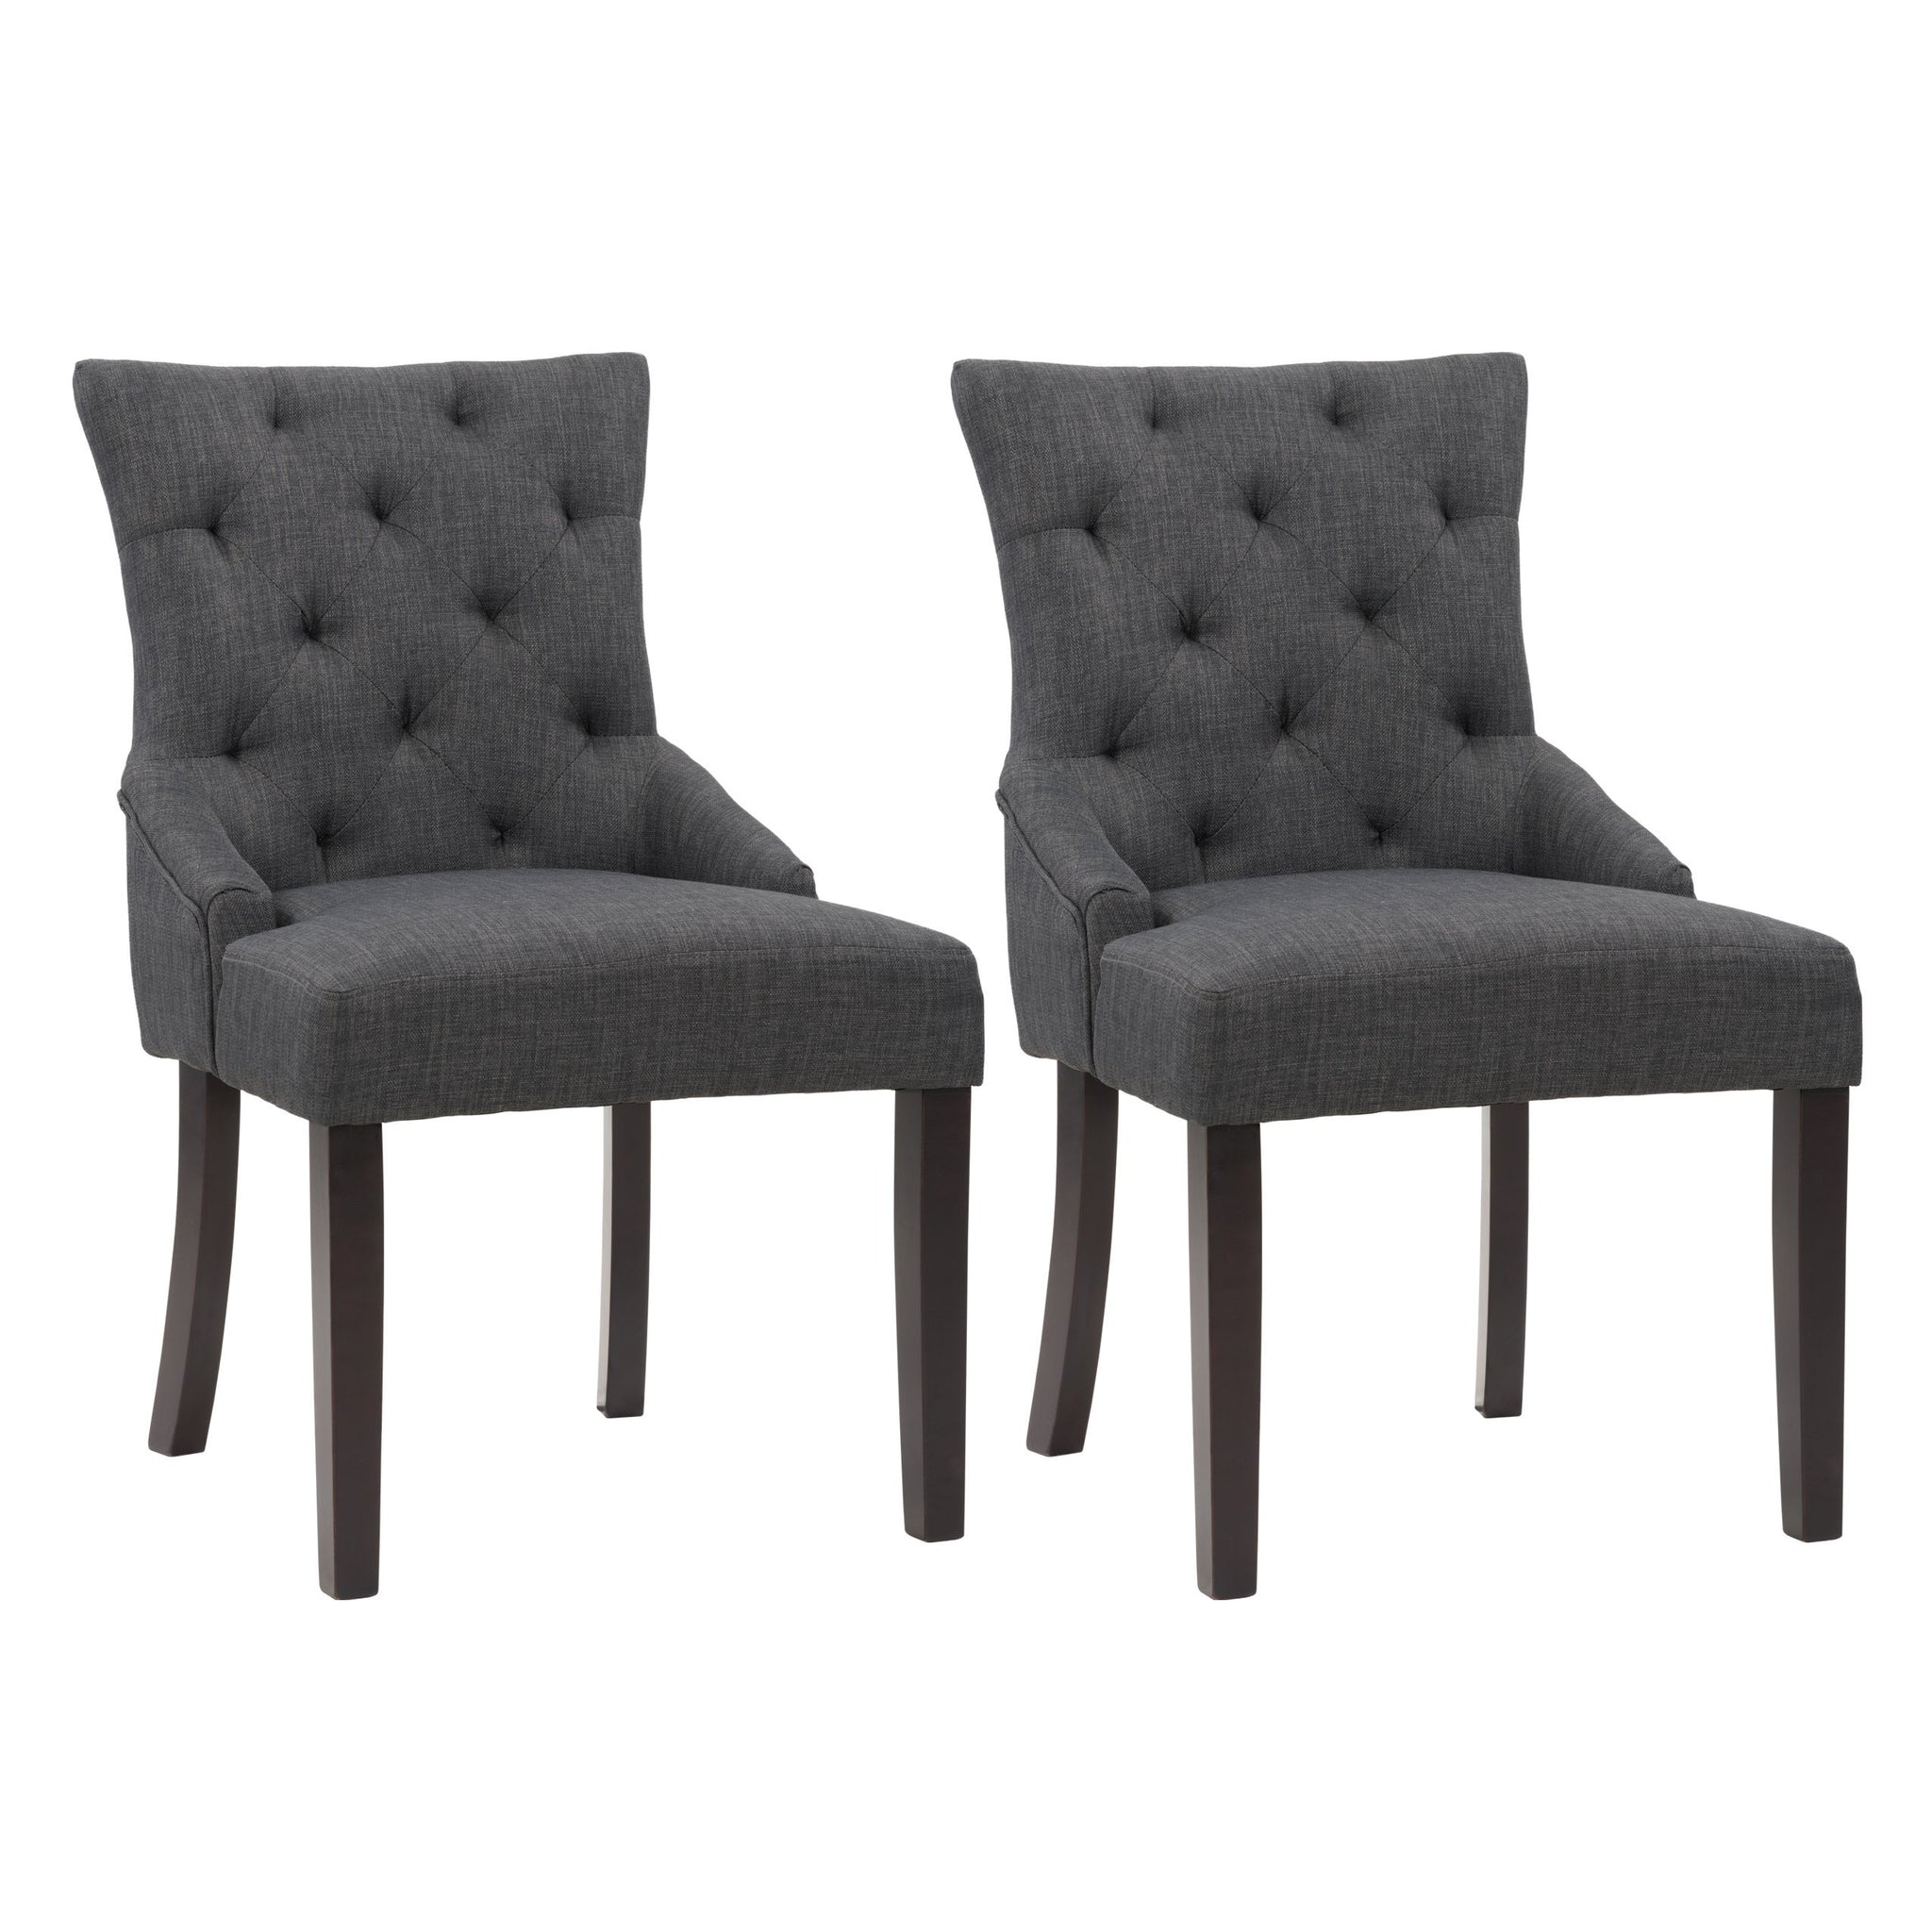 Antonio Tufted Accent Chair In Fabric Set Of 2 Clearance Corliving Furniture Us